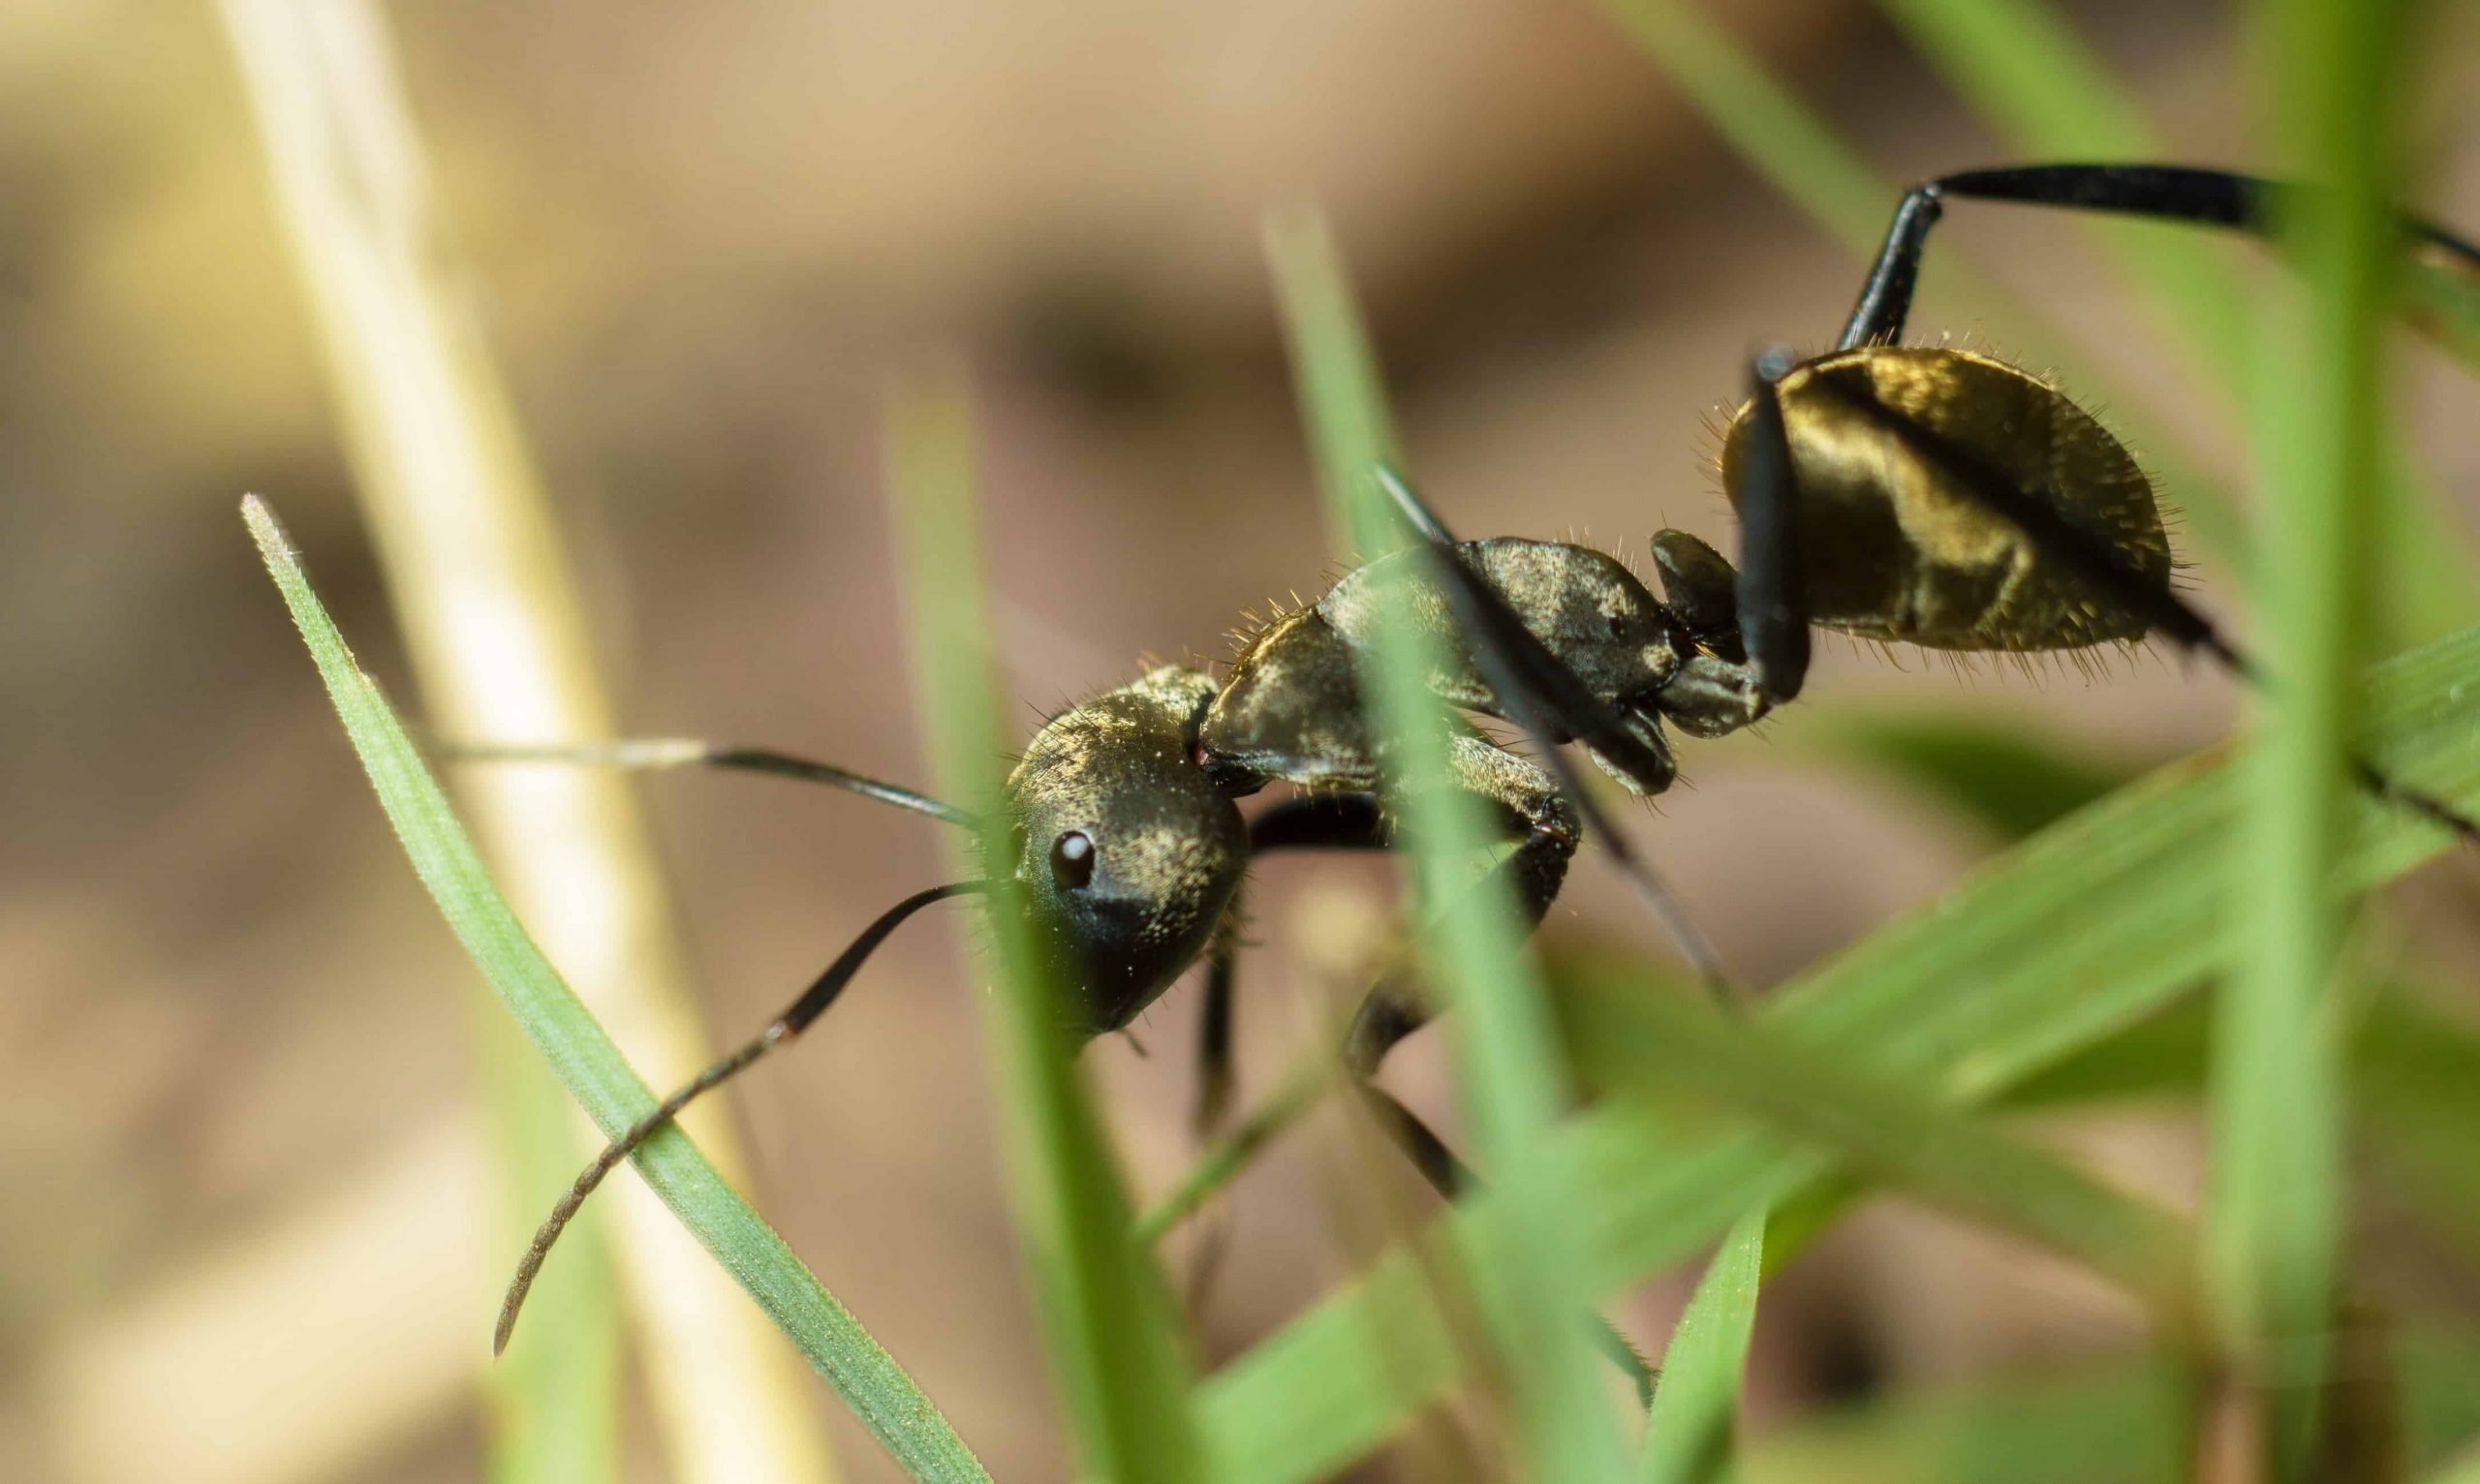 How to Control Ants in Lawn Organically